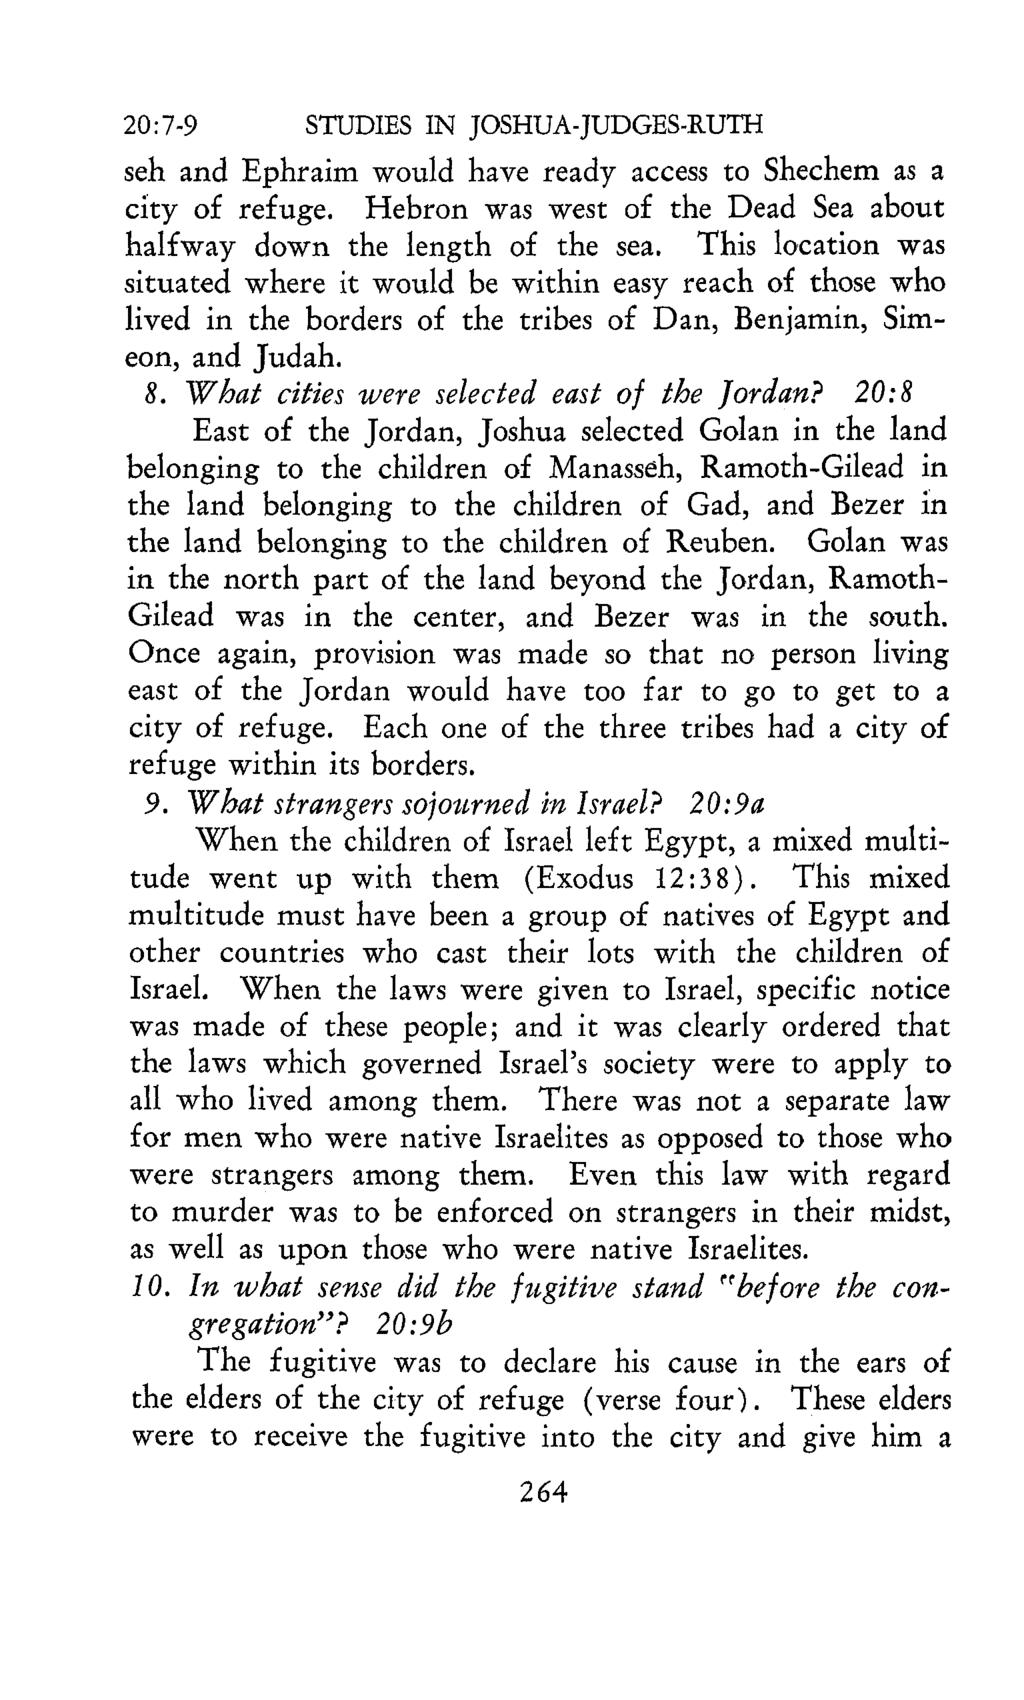 20: 7-9 STUDES N JOSHUA- JUDGES-RUTH seh and Ephraim would have ready access to Shechem as a city of refuge. Hebron was west of the Dead Sea about halfway down the length of the sea.